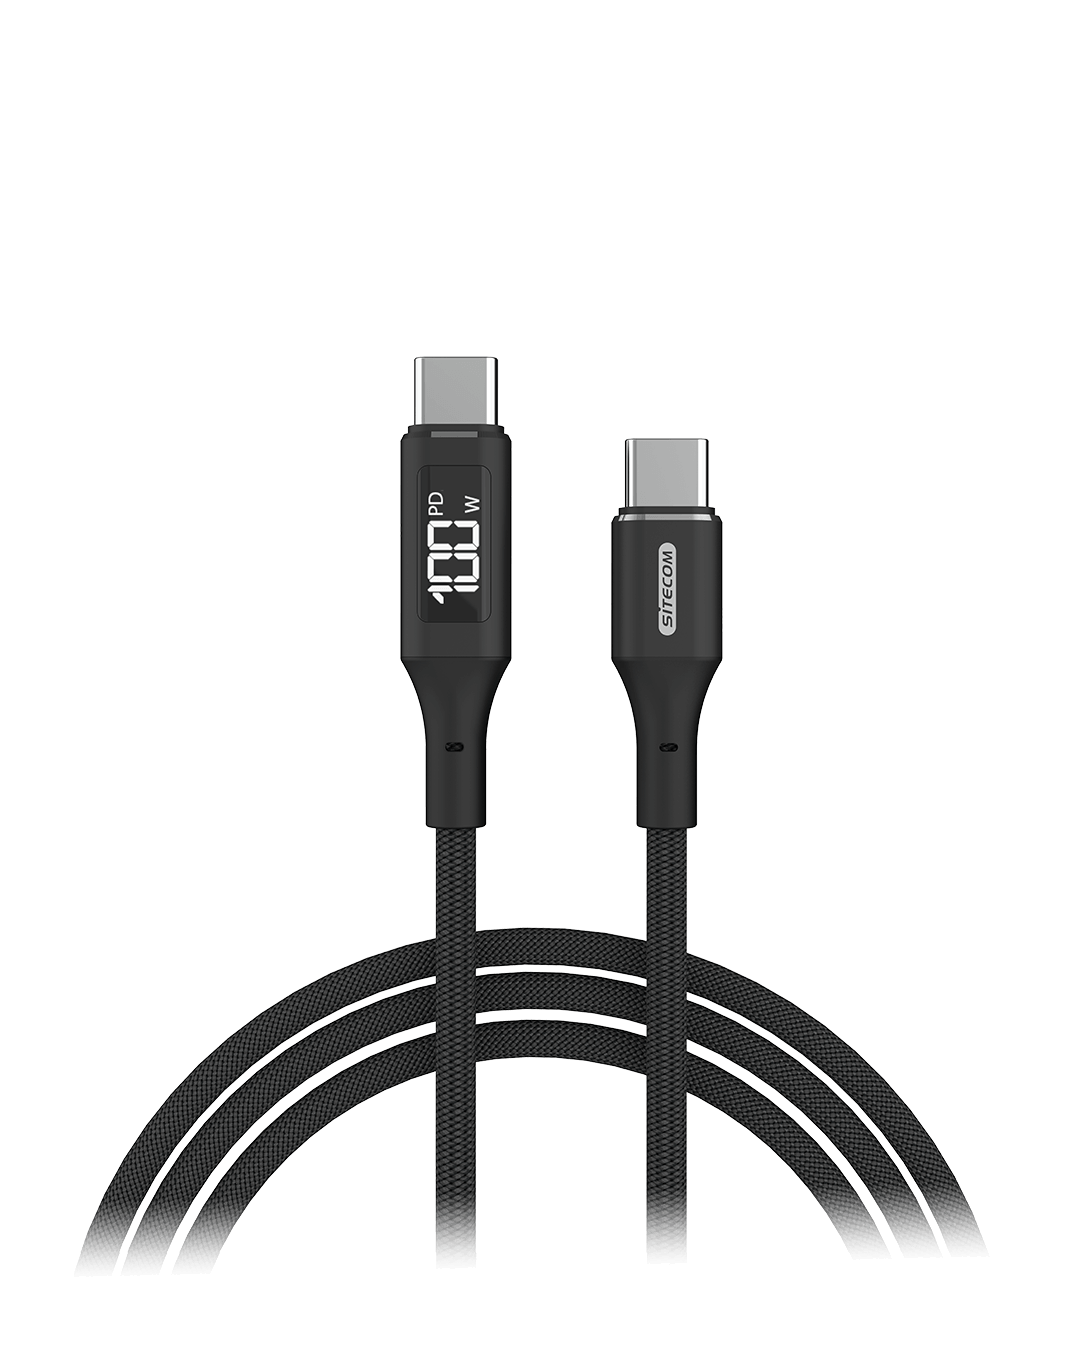 Sitecom - USB-C to USB-C Power cable with LED display - CA-1005